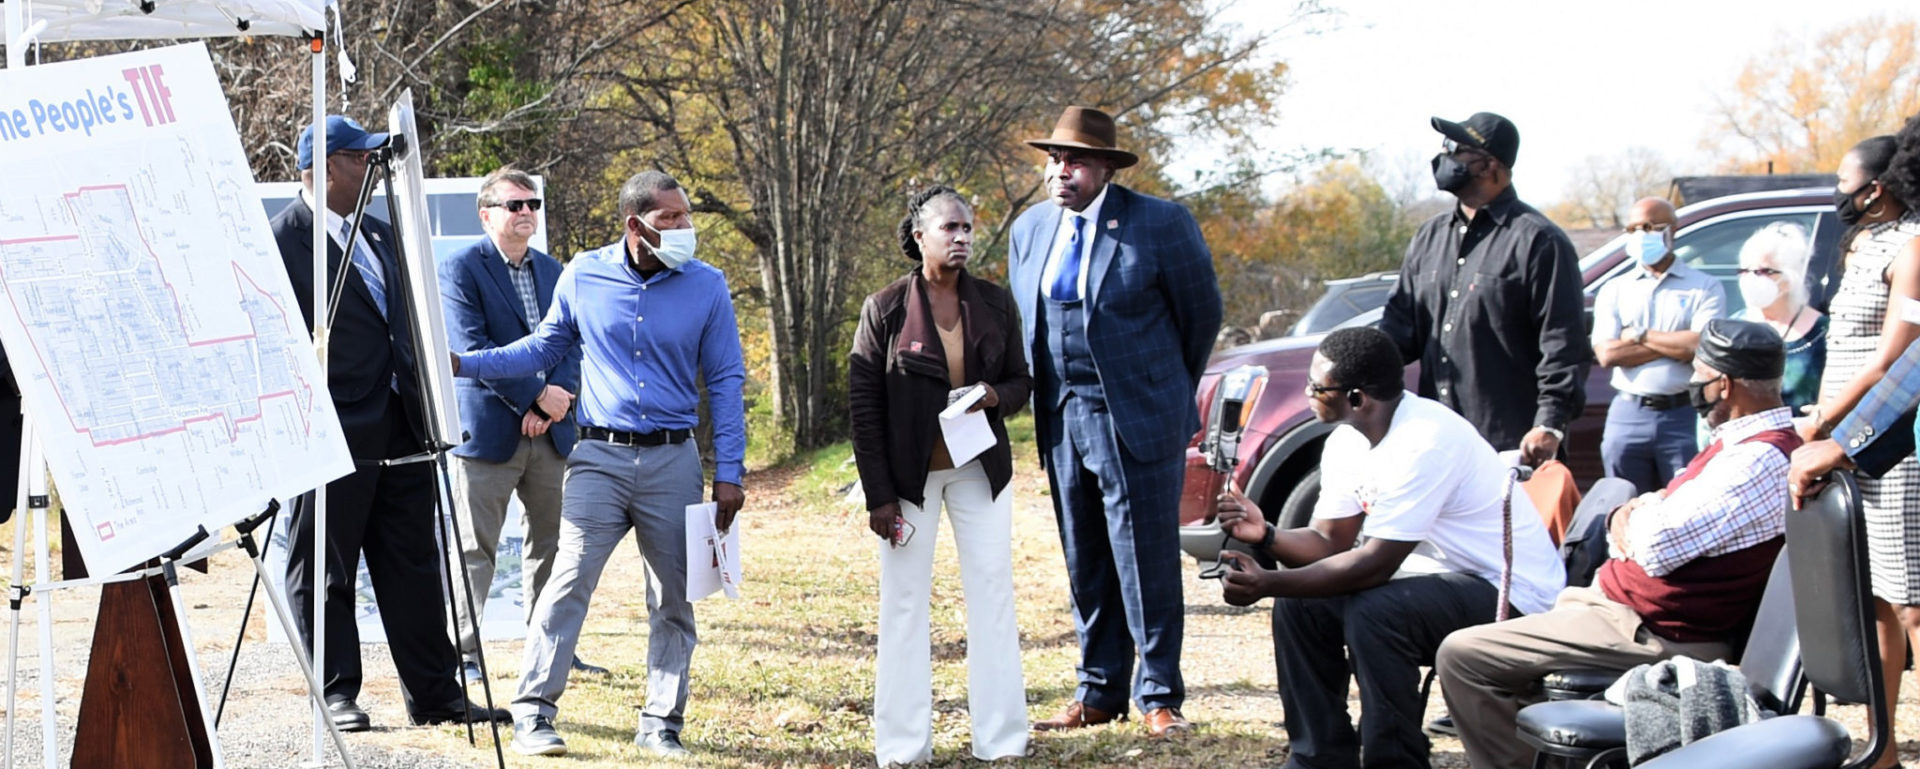 The ongoing effort of the SoulsvilleUSA Neighborhoods Development District to secure a TIF (tax-increment financing) designation for South Memphis led to this December 2021 gathering. (Photos: Gary S. Whitlow/GSW Enterprises/The New Tri-State Defender Archives)